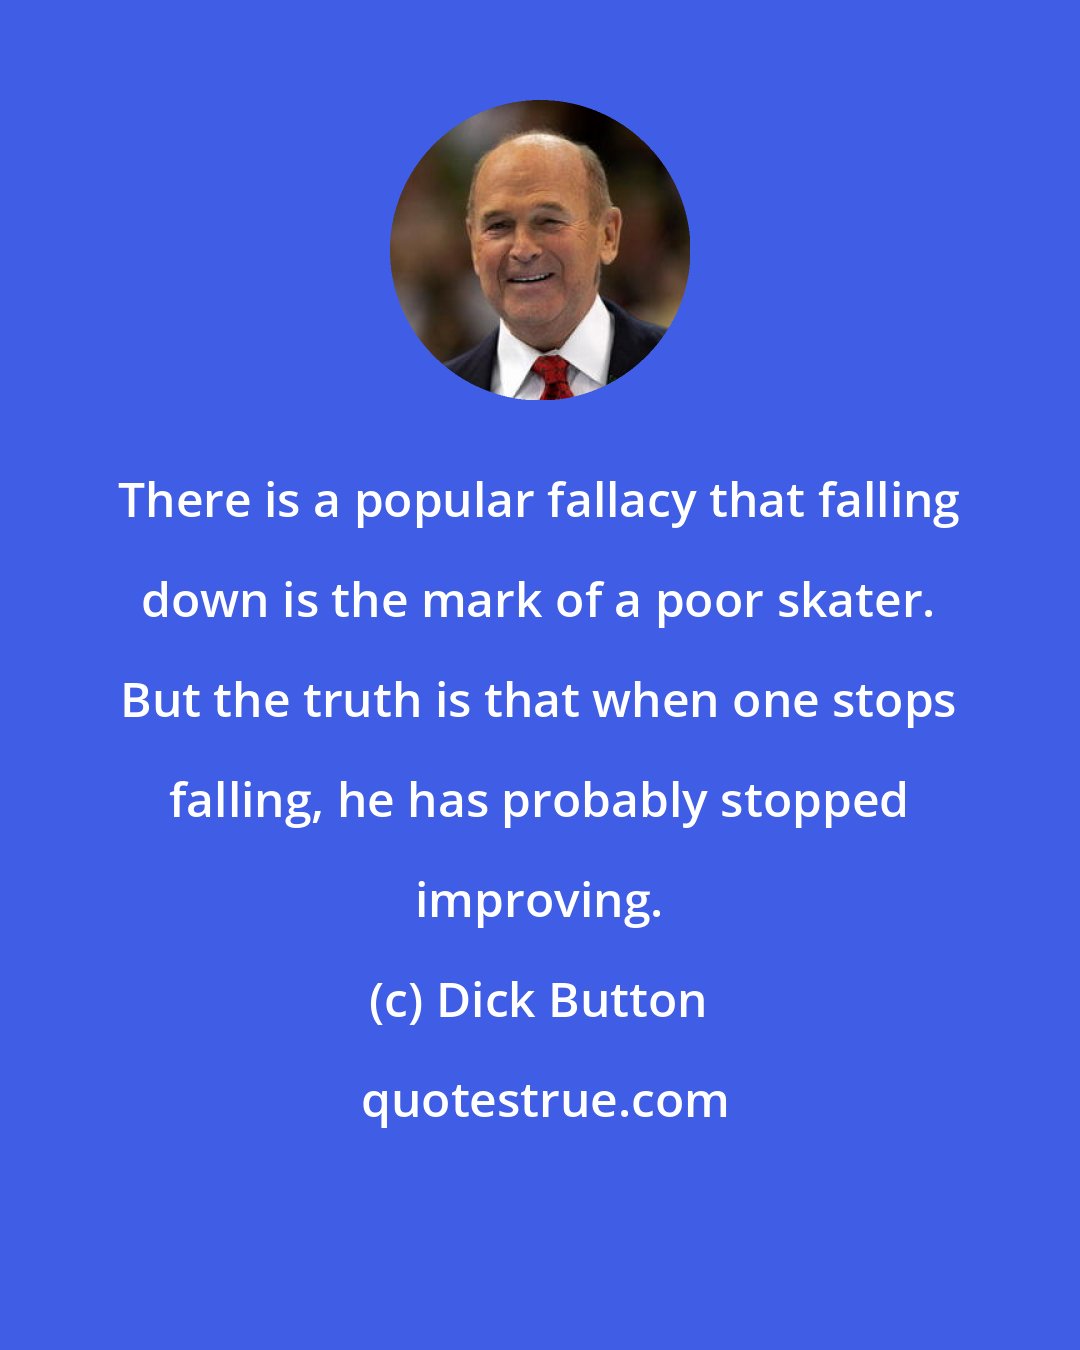 Dick Button: There is a popular fallacy that falling down is the mark of a poor skater. But the truth is that when one stops falling, he has probably stopped improving.